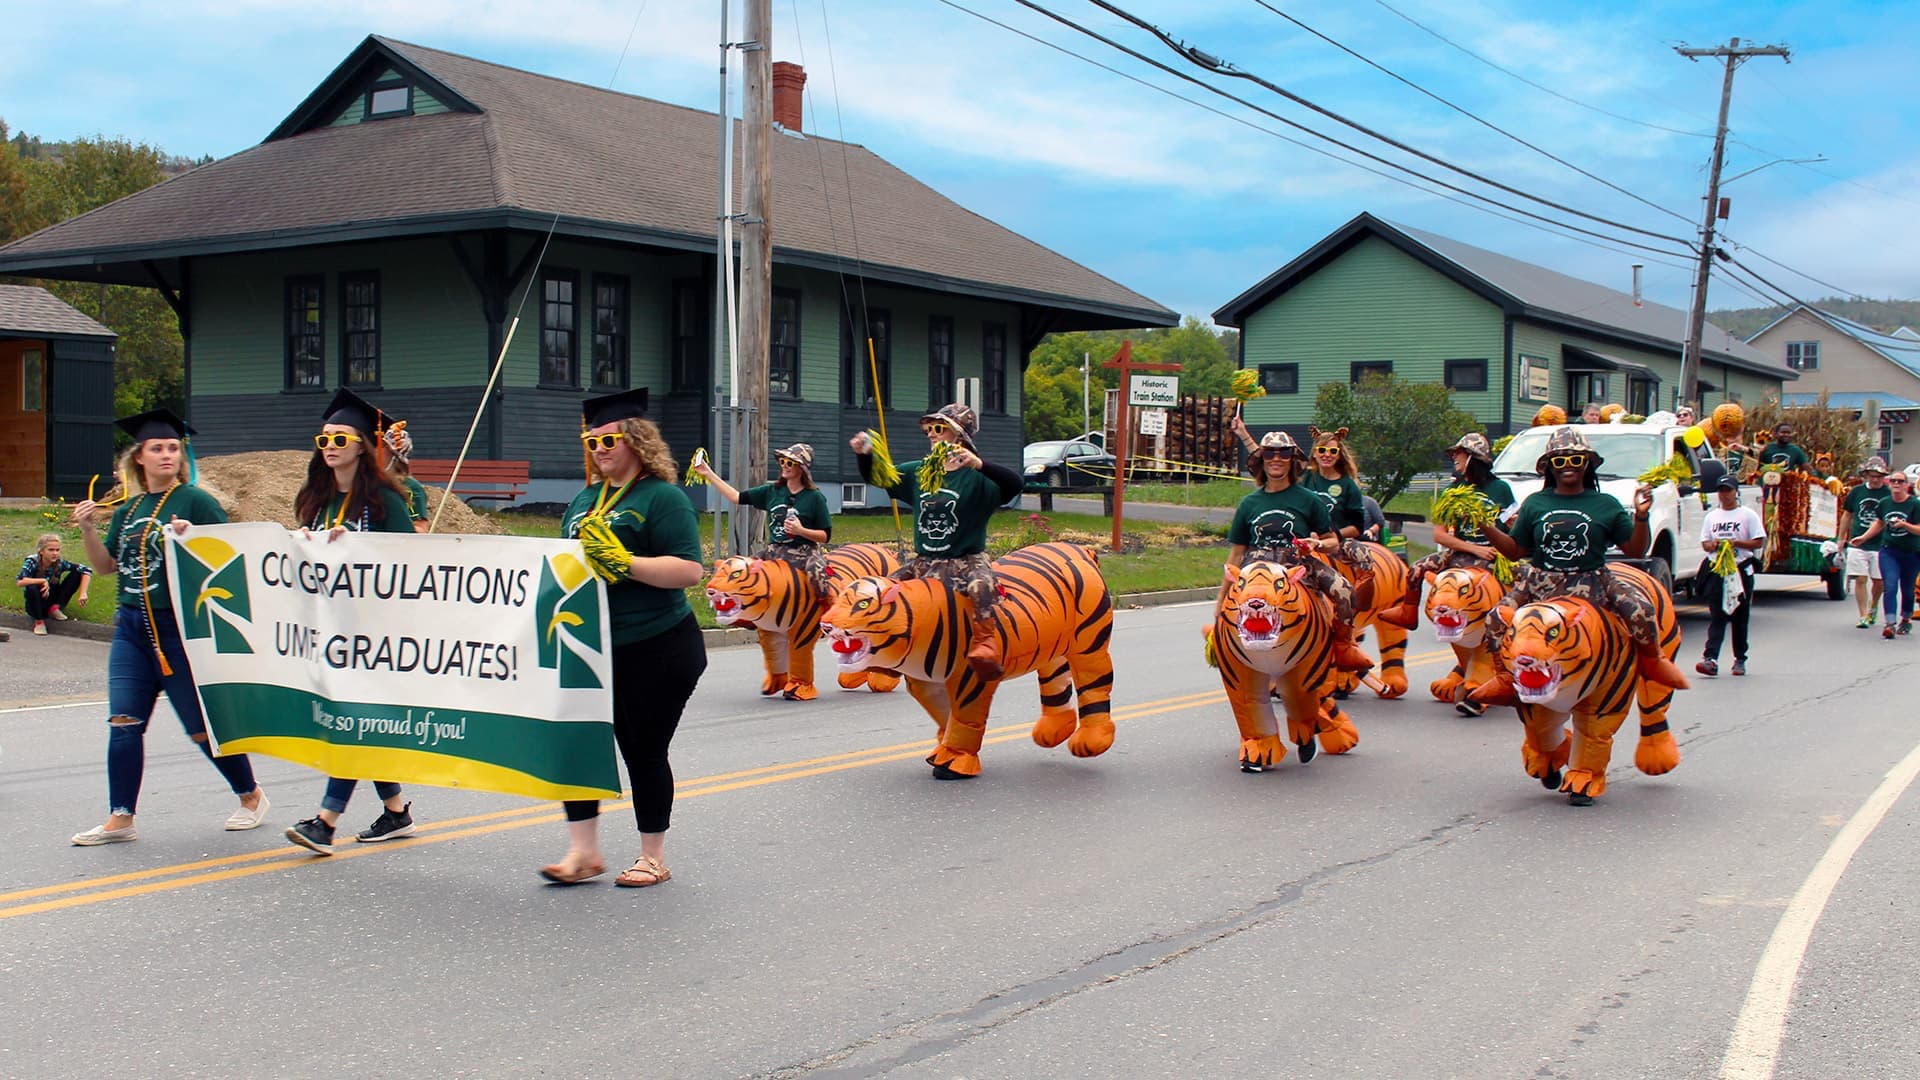 UMFK students, staff, and alumni march in a homecoming parade, some wearing inflatable bengals